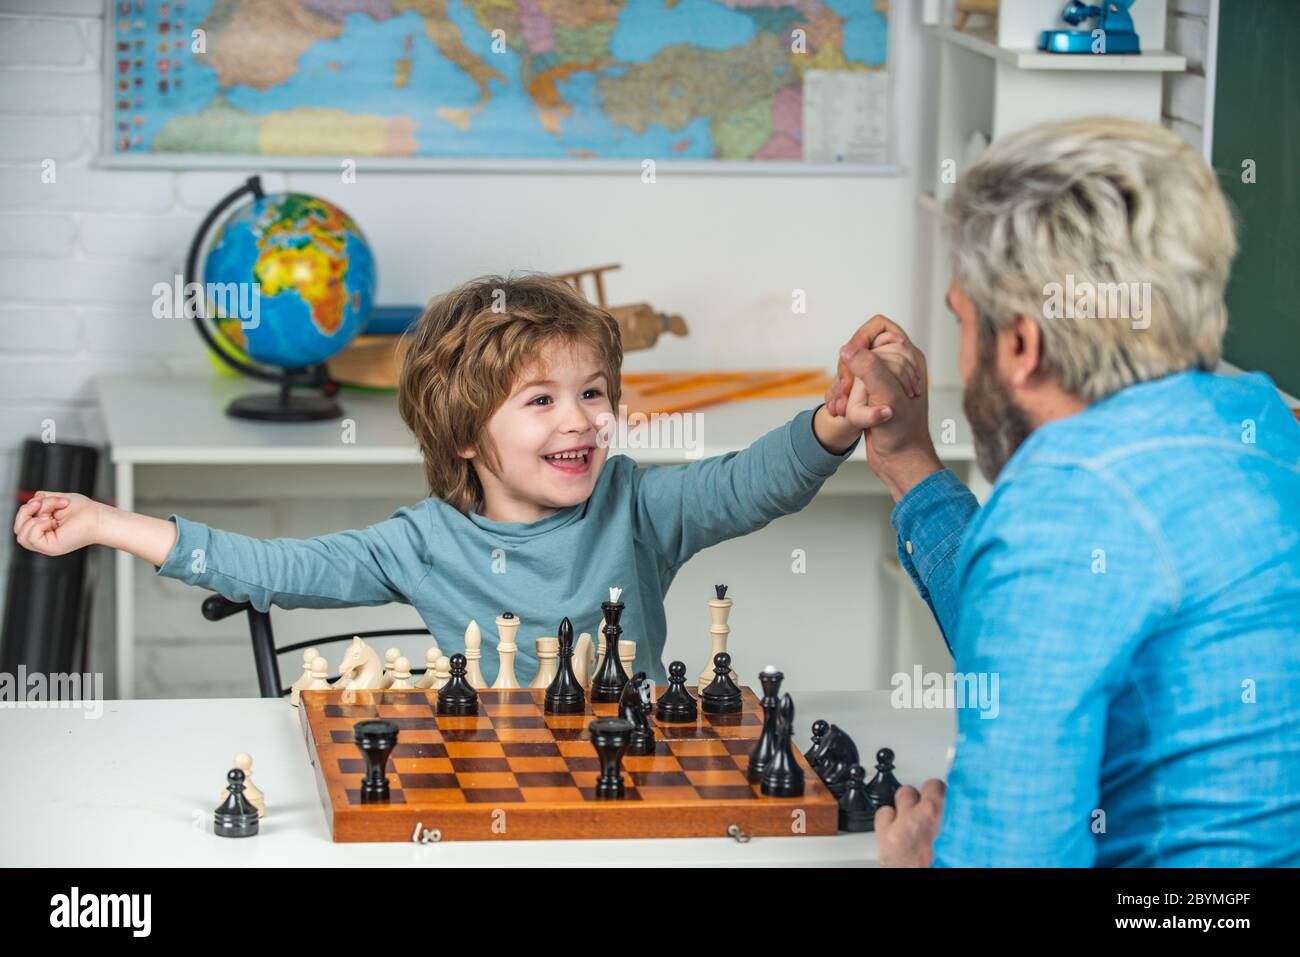 Young kid boy playing chess with father and having fun. Education and learning people concept - pupil and Teacher Stock Photo